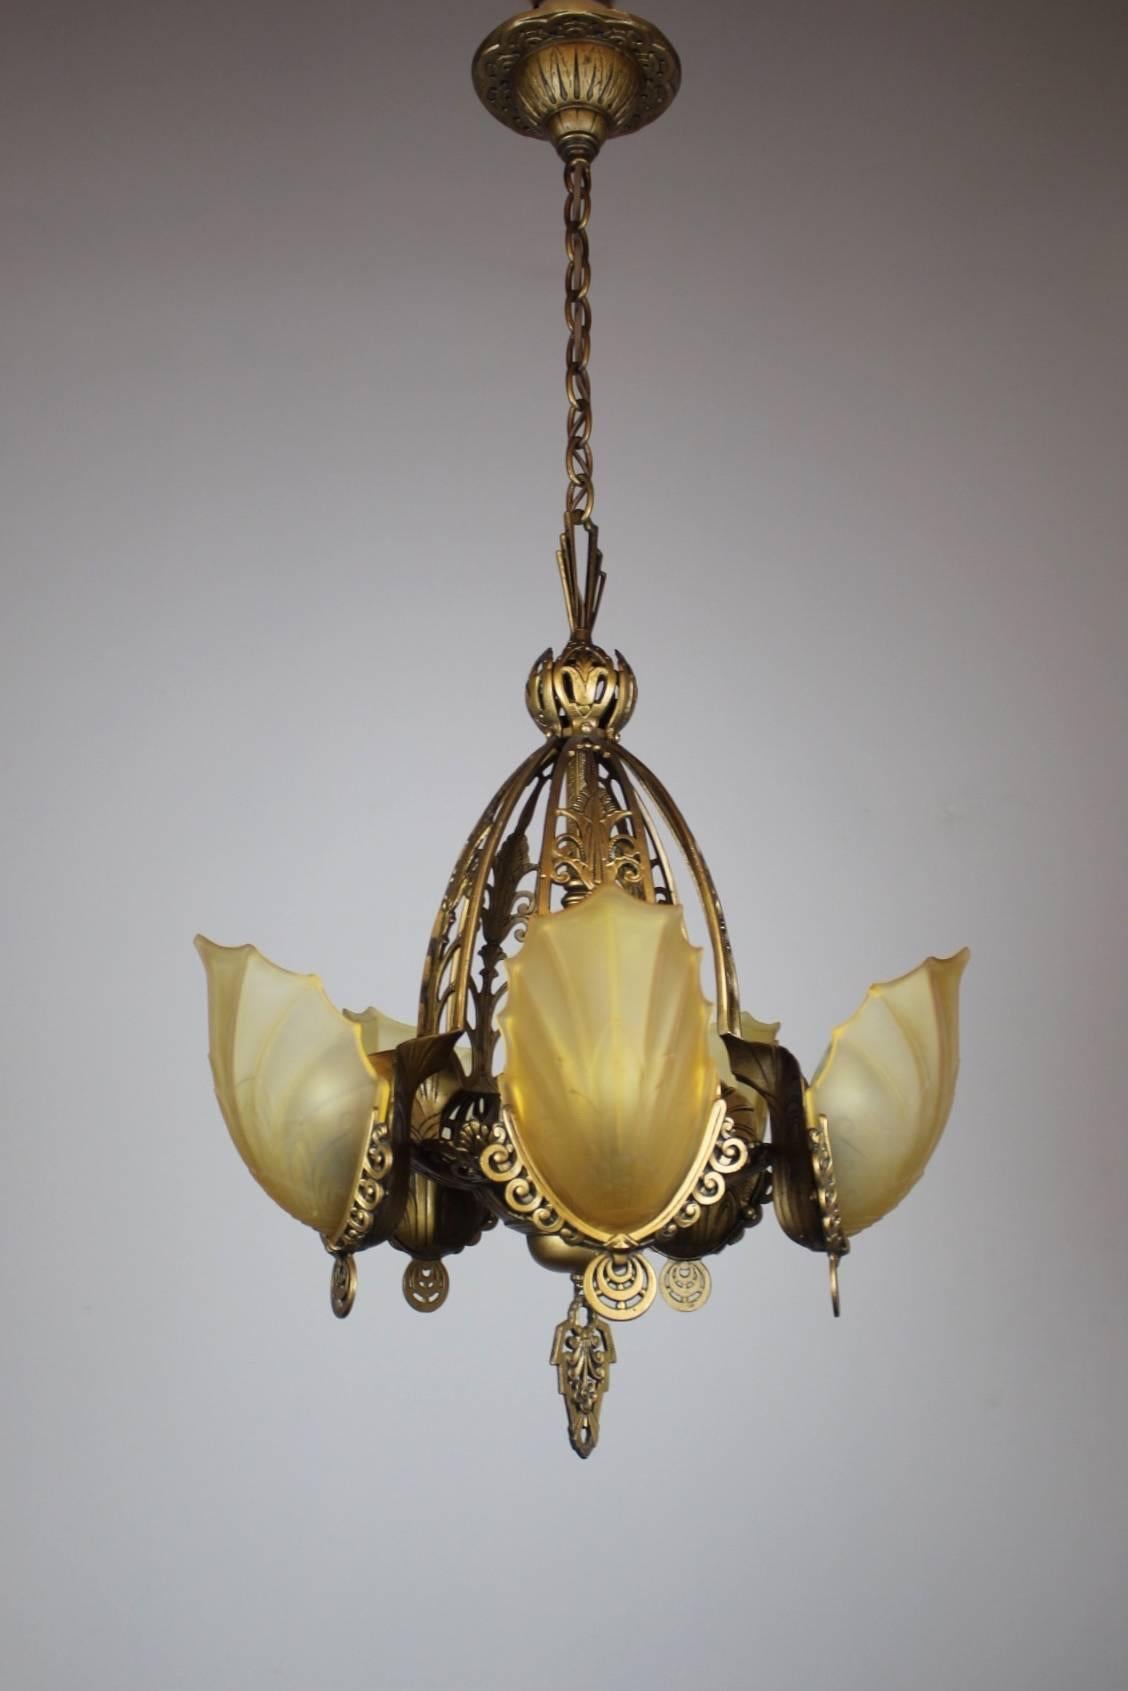 A beautiful and original Art Deco slip-shade fixture, circa 1920. These gorgeous shades are in a frosted honey amber tone. Gorgeously decorated cut-out brass body in a warm bronze tone. Wonderful for a dining room, entryway, or living room.